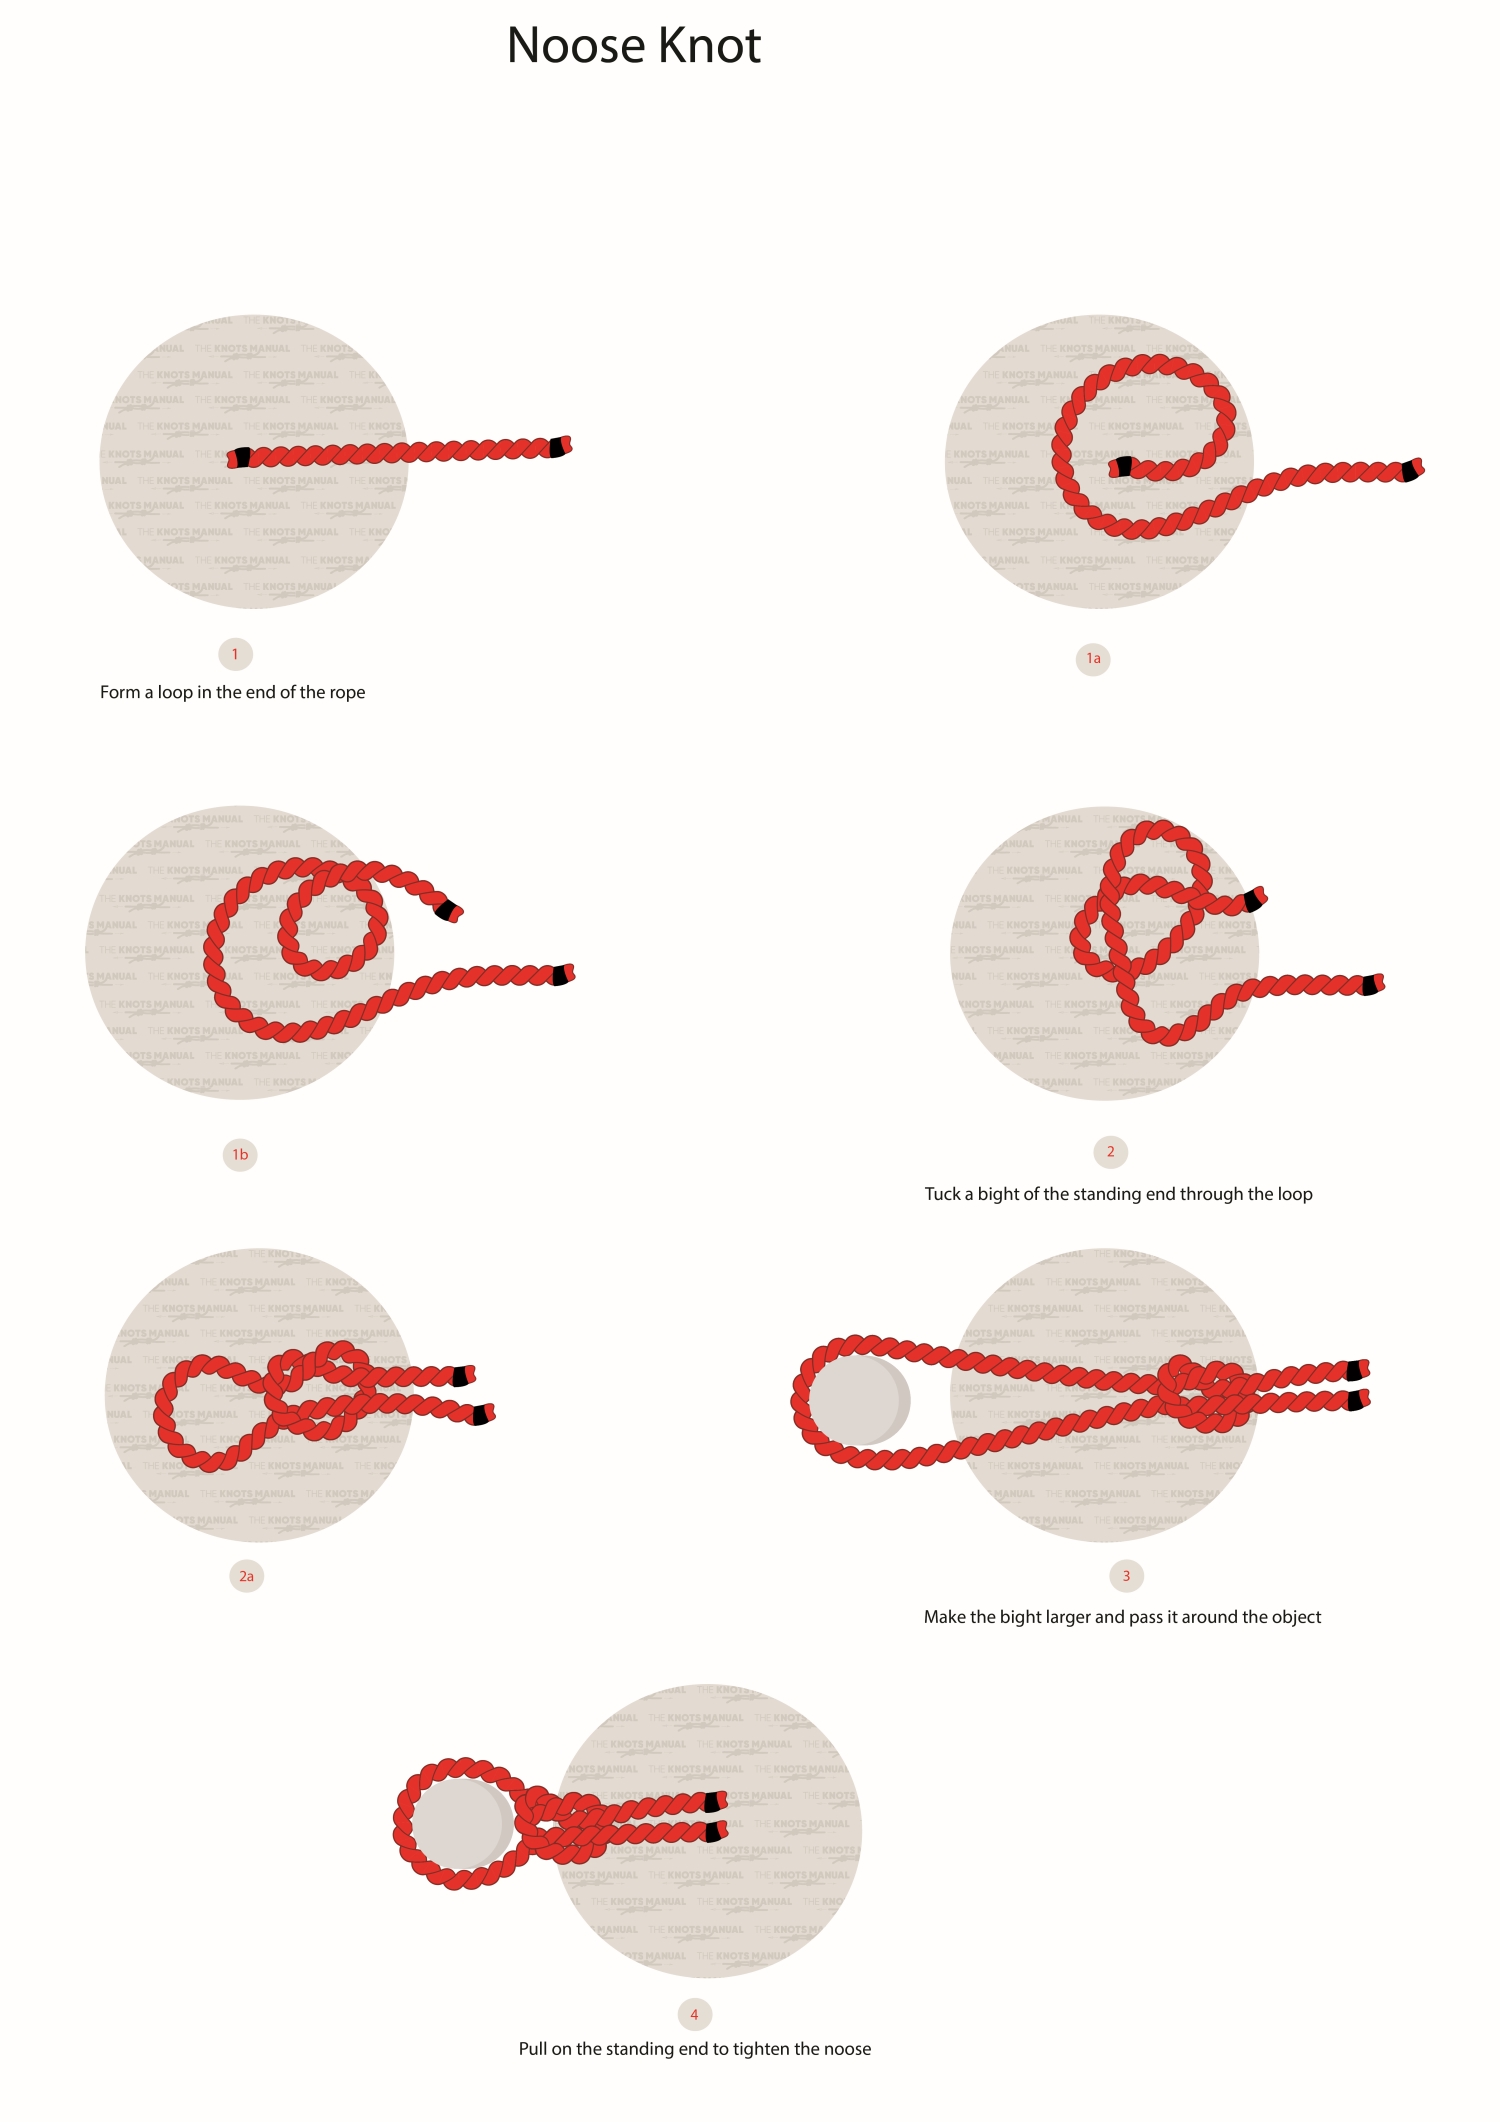 Noose Knot step by step